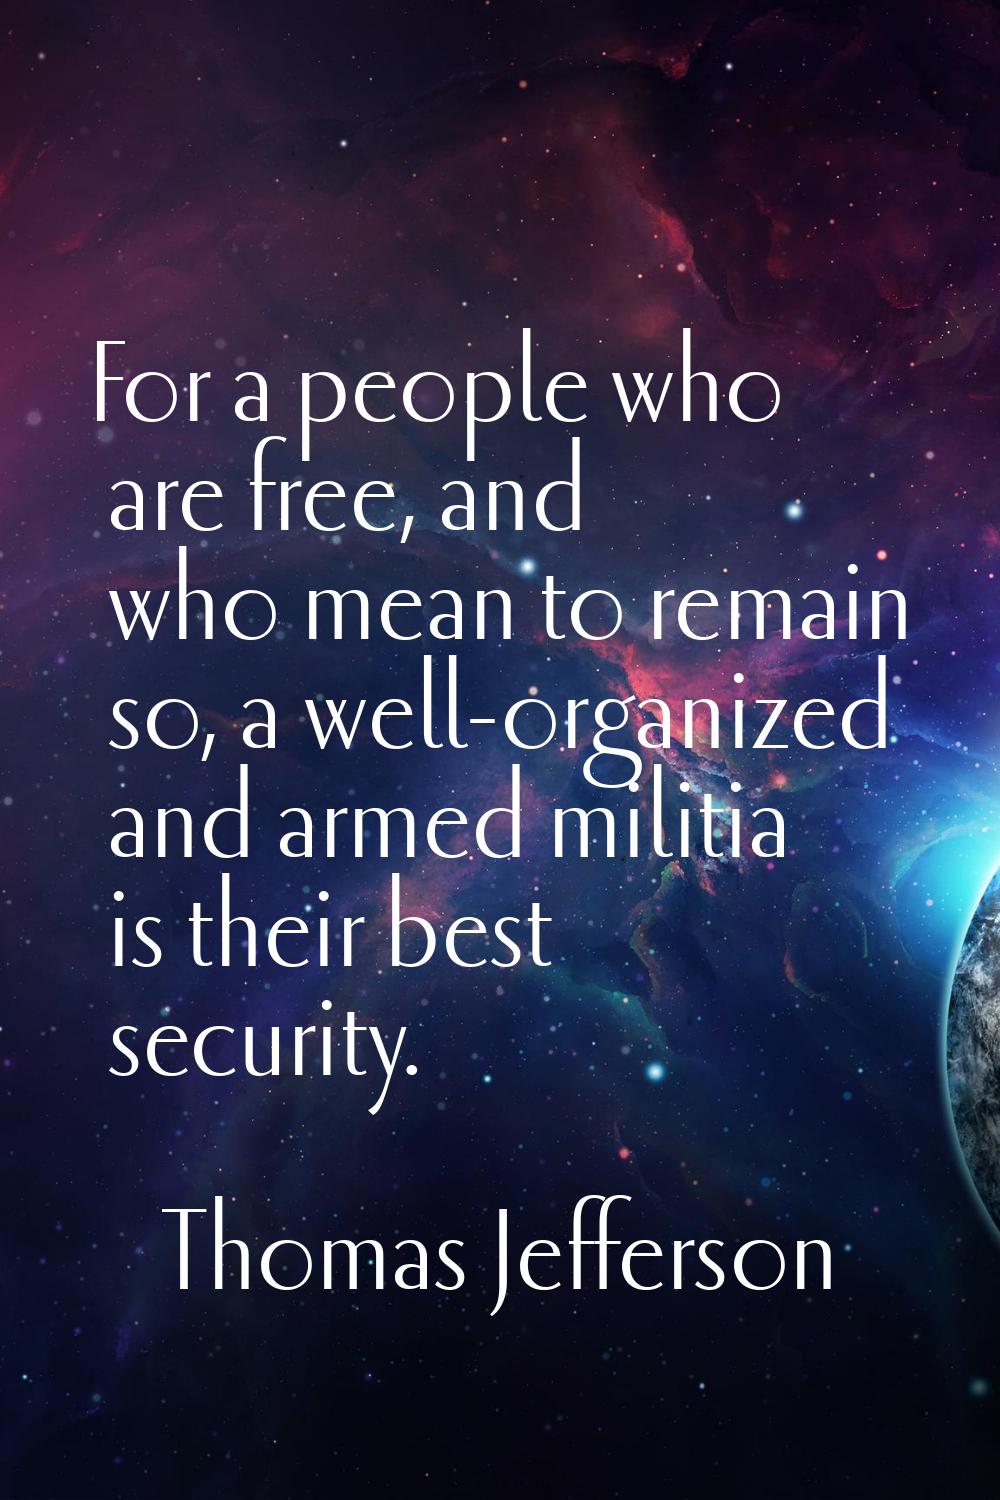 For a people who are free, and who mean to remain so, a well-organized and armed militia is their b